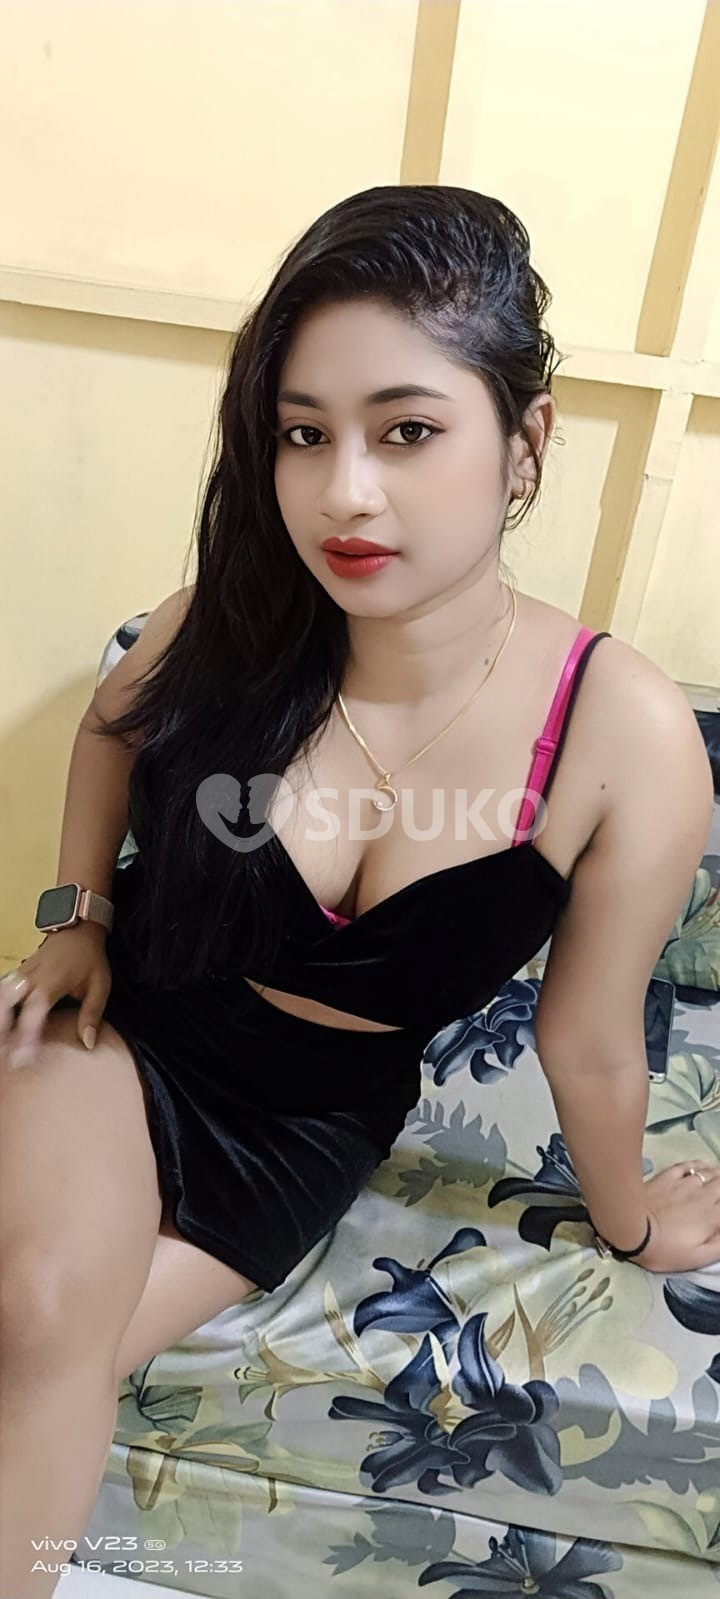 Rohtak  ❣️Best call gir.l /service in low price high profile call girl available call me anytime